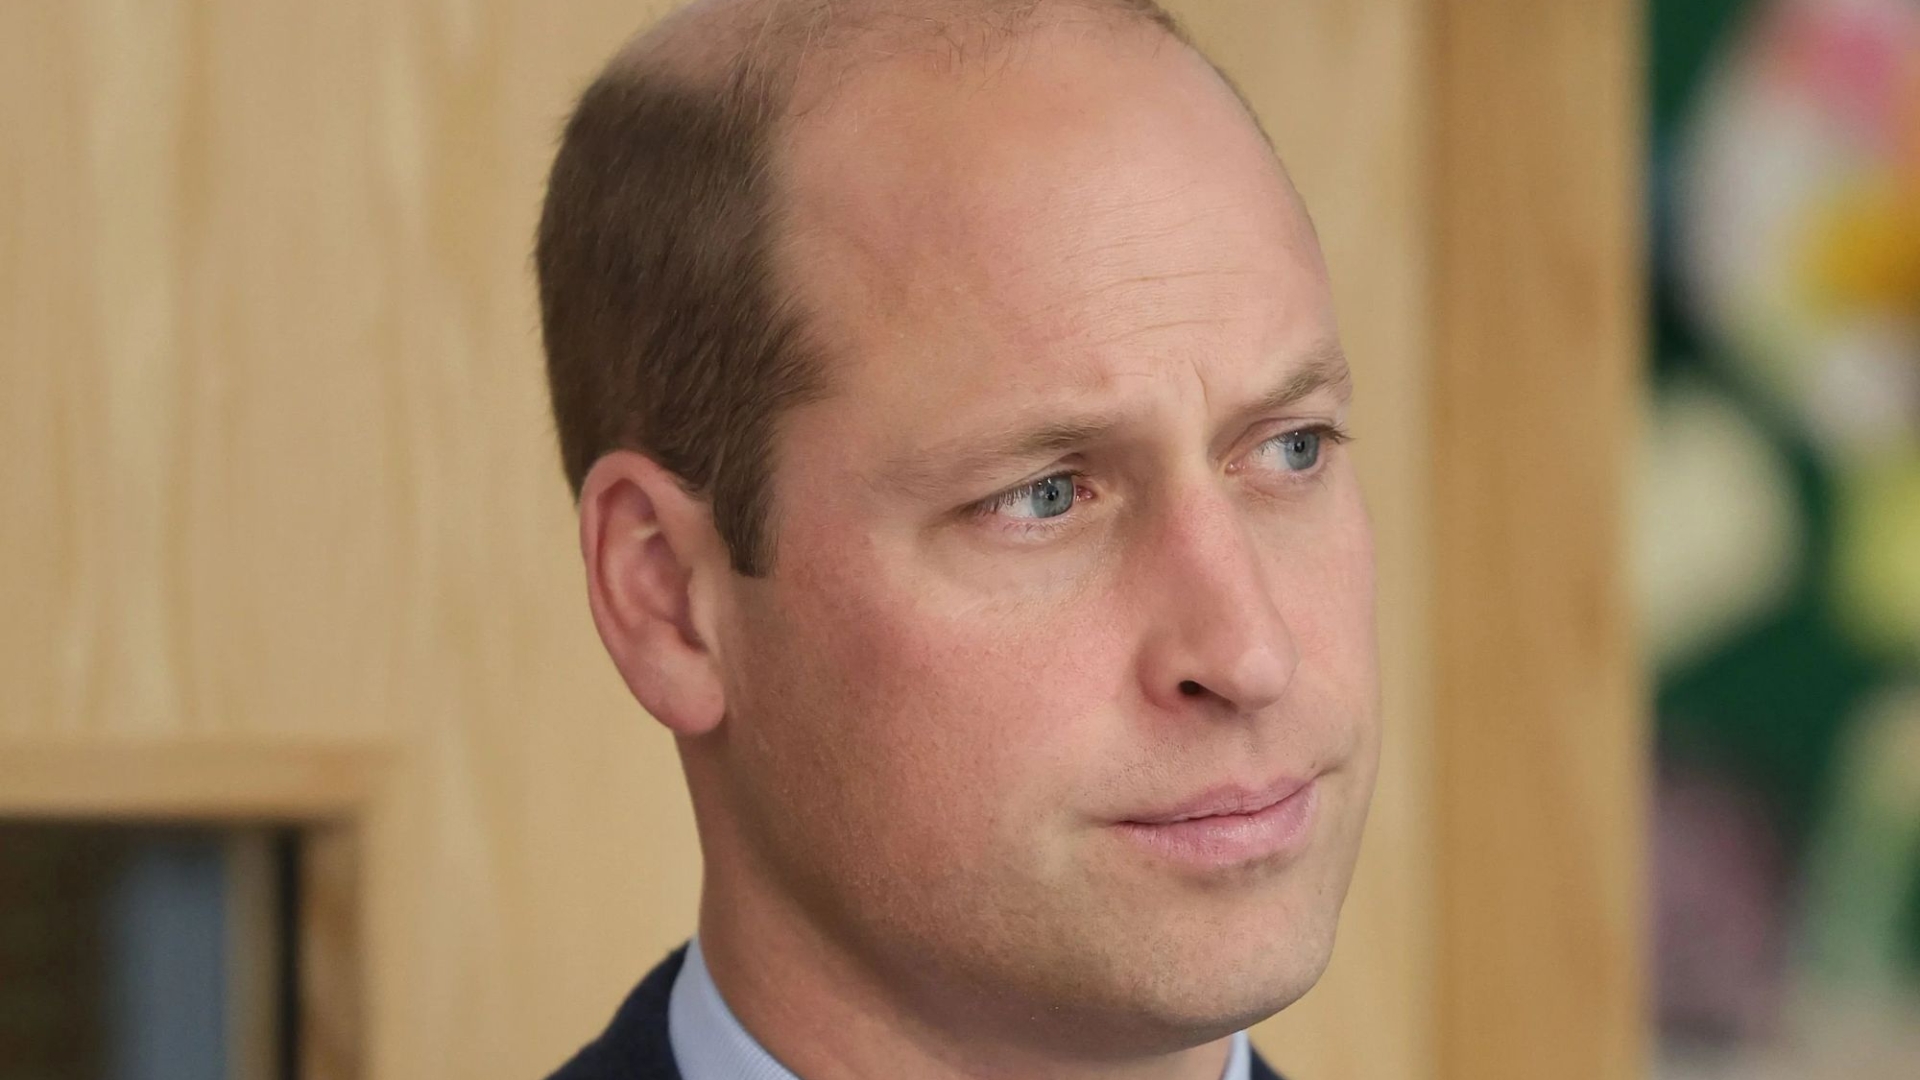 Prince William feels Netflix’s The Crown is ‘cashing in on Princess Diana’s deceitful BBC interview’, sources claim